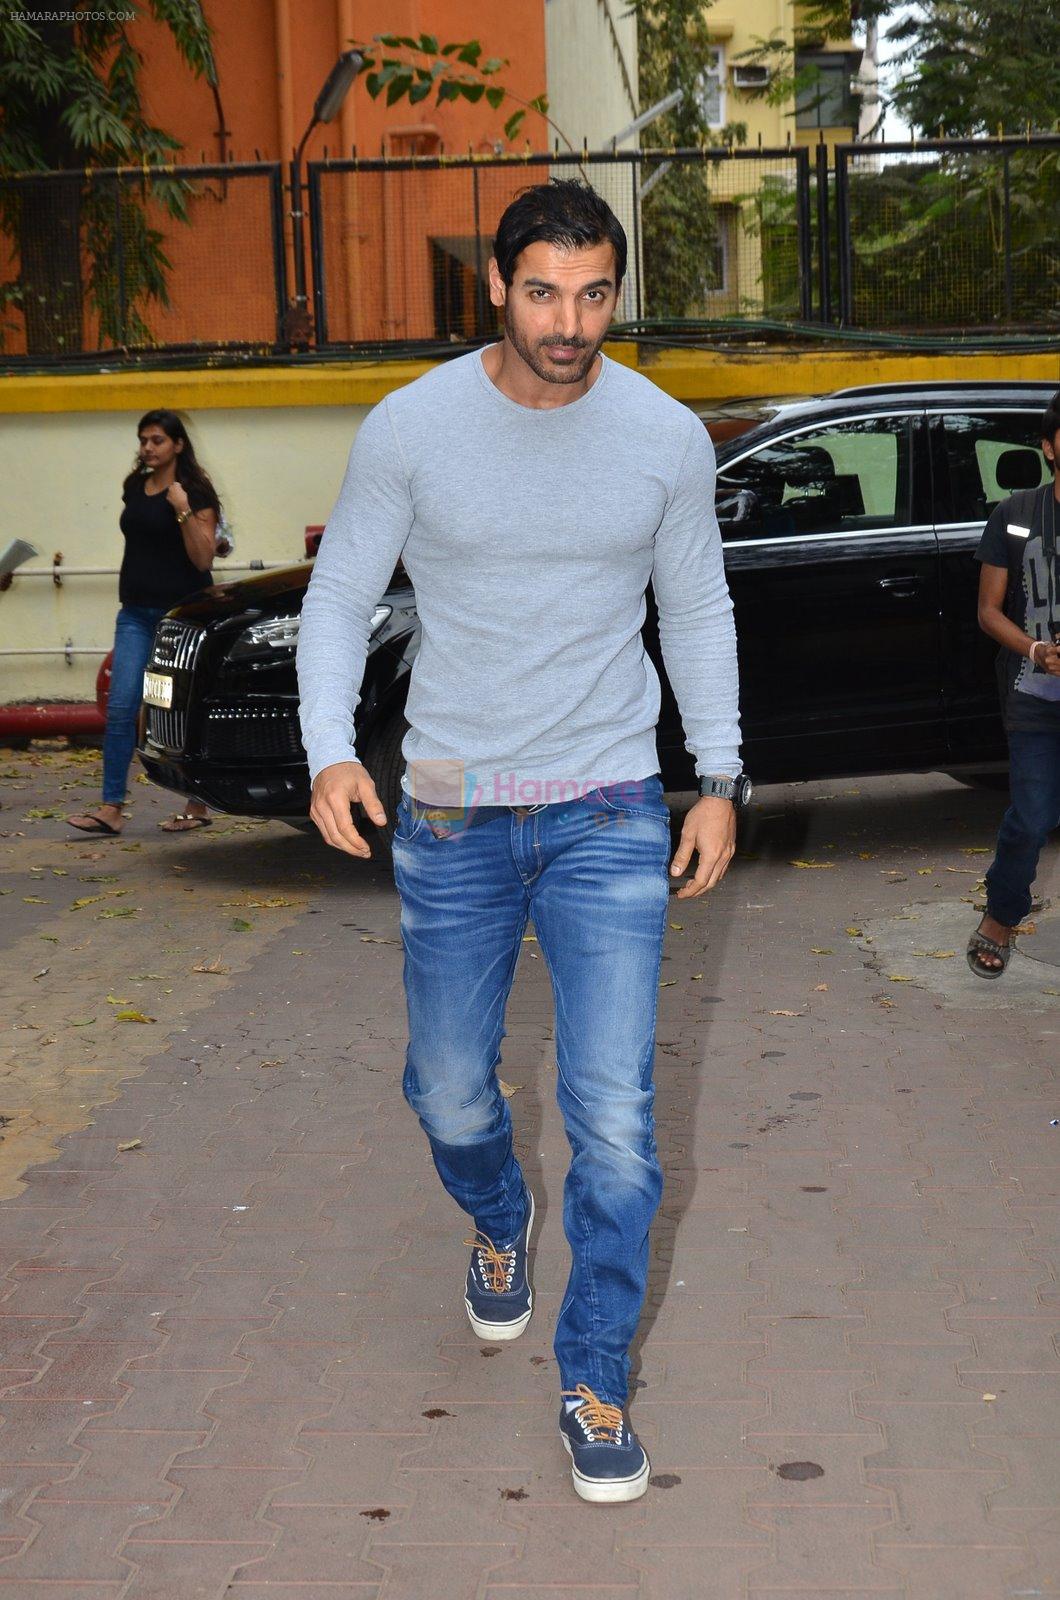 John Abraham at the launch of book In Search of Dignity and Justice by Sudharak Olwe in Mumbai on 22nd Jan 2015